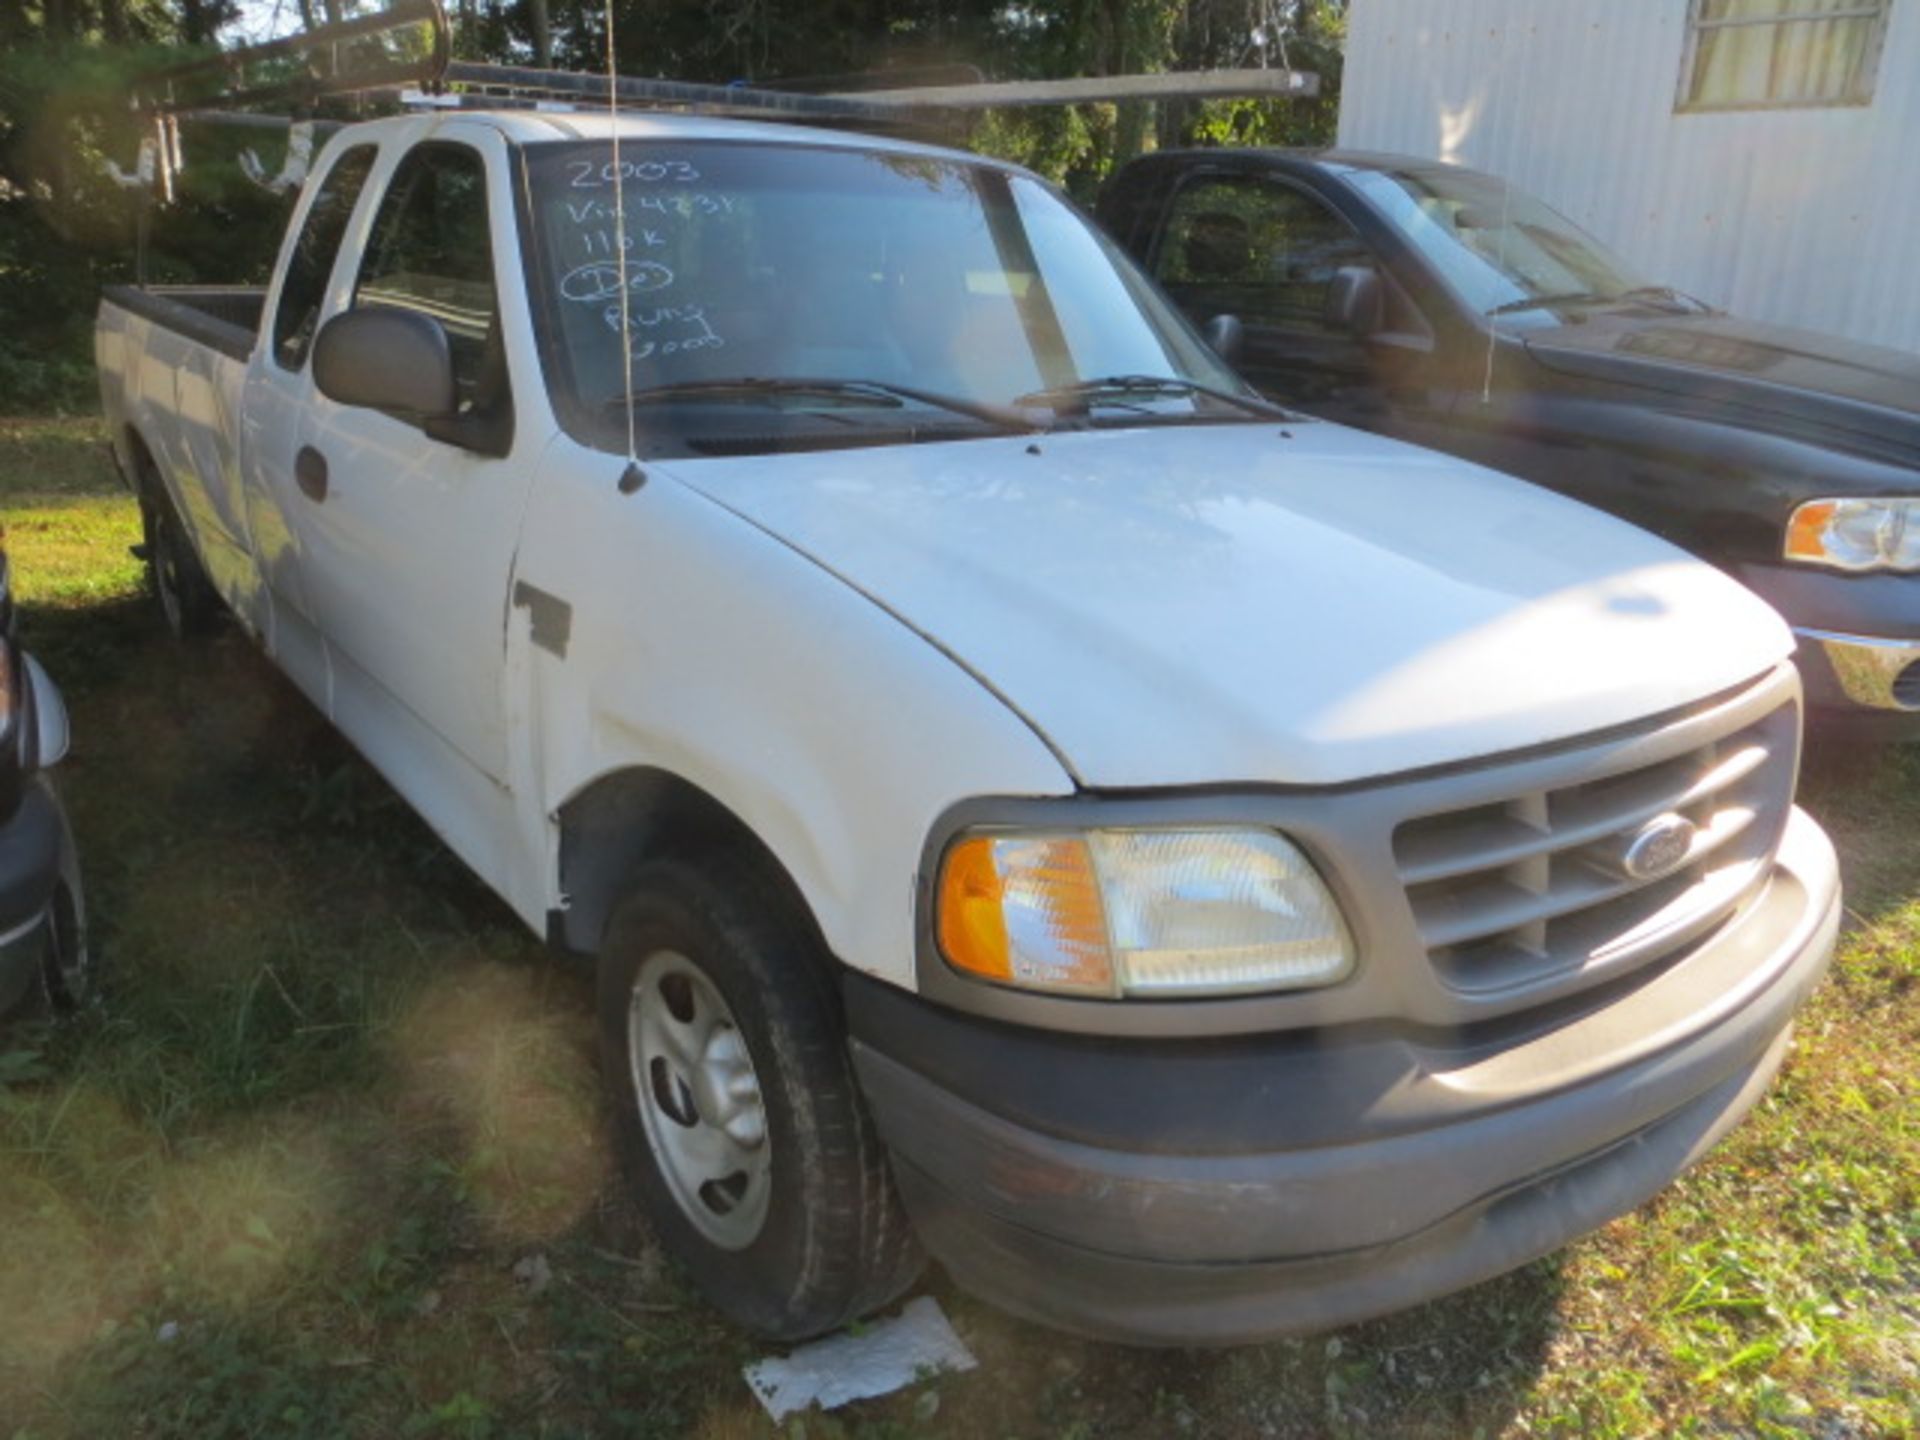 2003 Ford F-150 XL-EXTENDED CAB-BODY DAMAGE 116000 MILES,VIN 1FTRX17W53NA84231, SOLD WITH GOOD TRANS